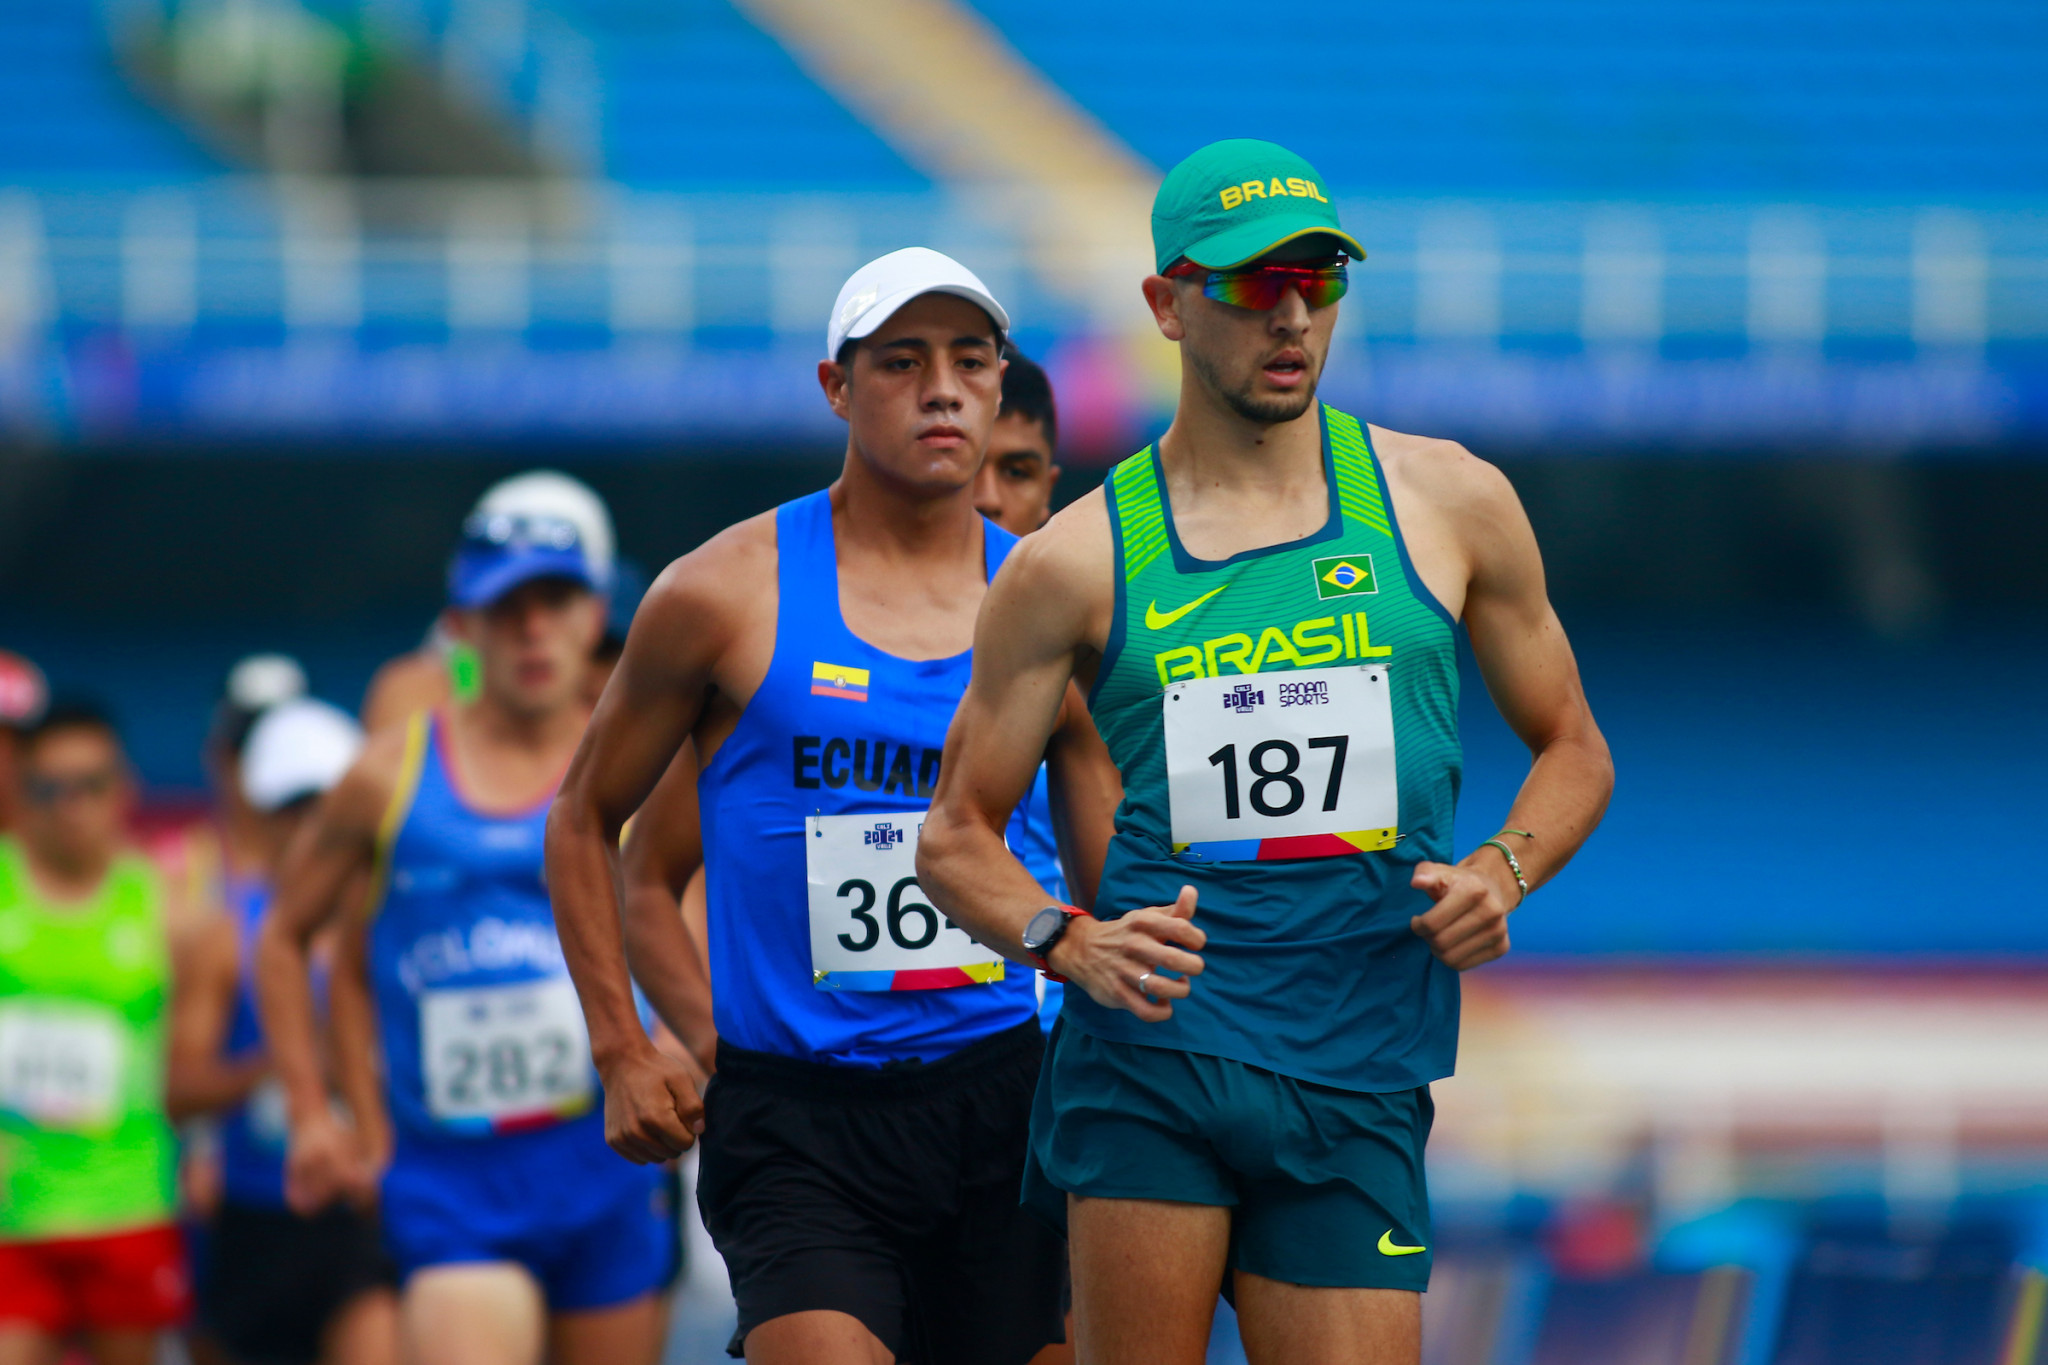 Matheus Correa, right, led for most of the men's race walk but had to settle for silver ©Agencia.Xpress Media